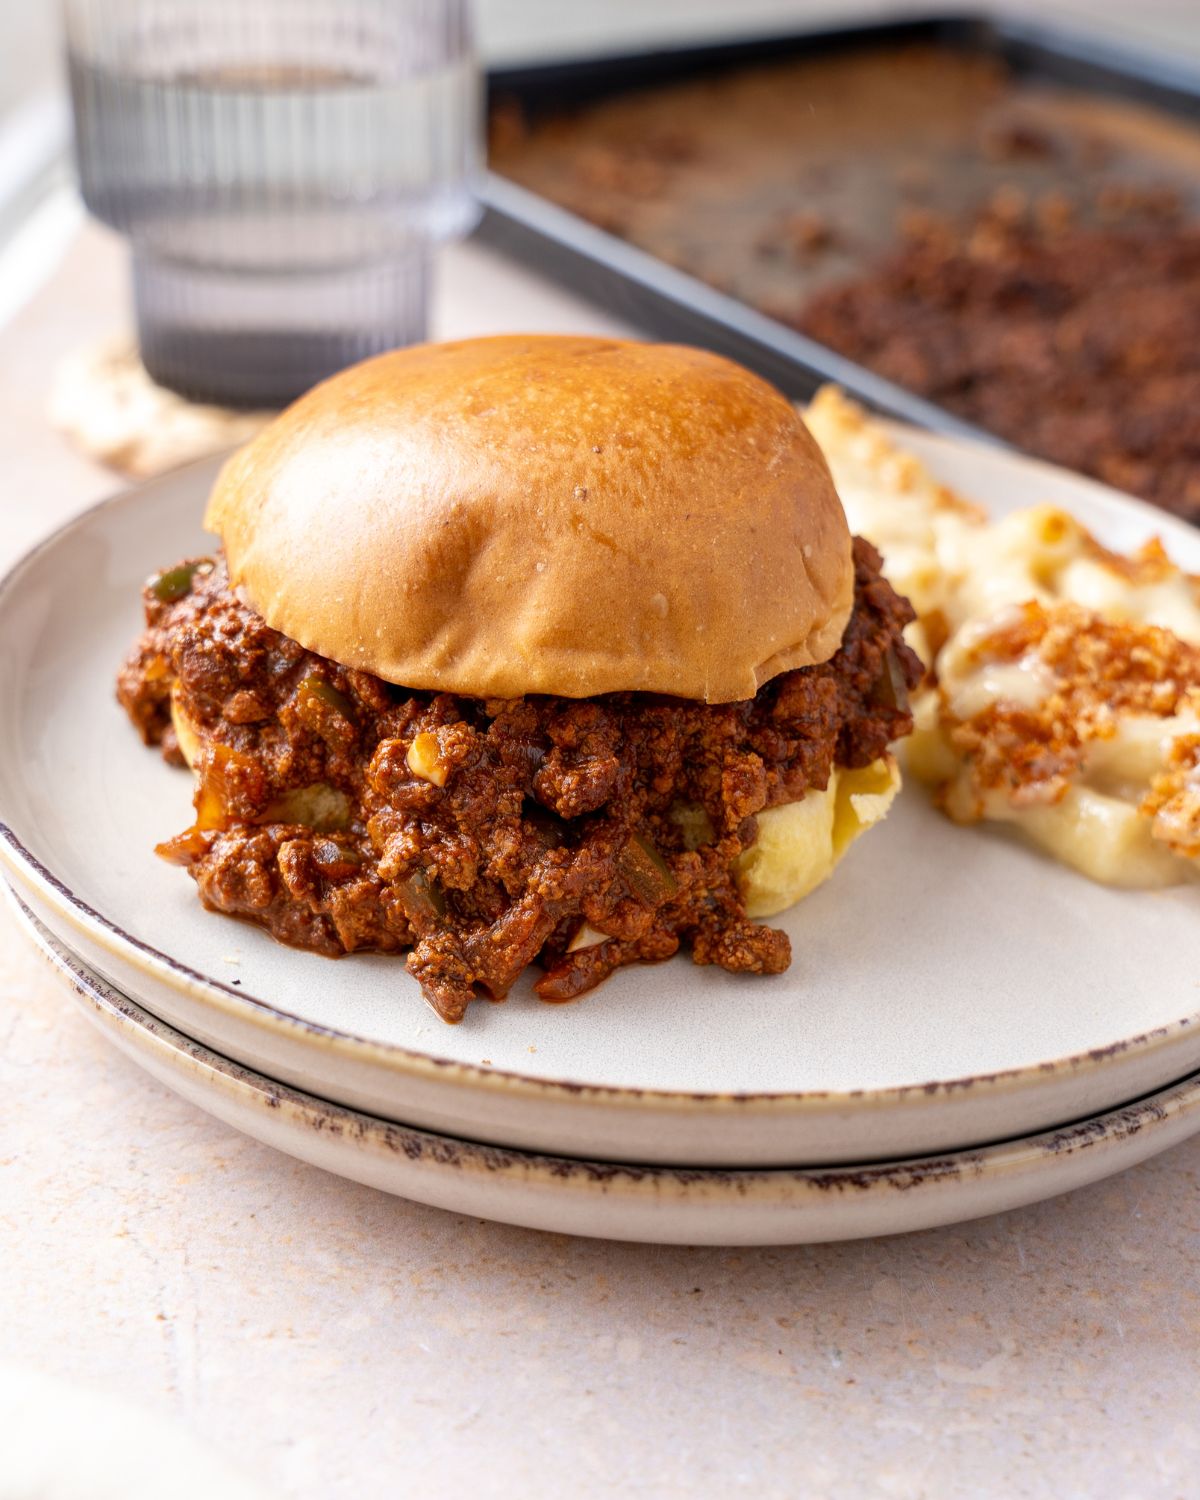 Vegan sloppy joes in a burger bun on a plate with mac and cheese.